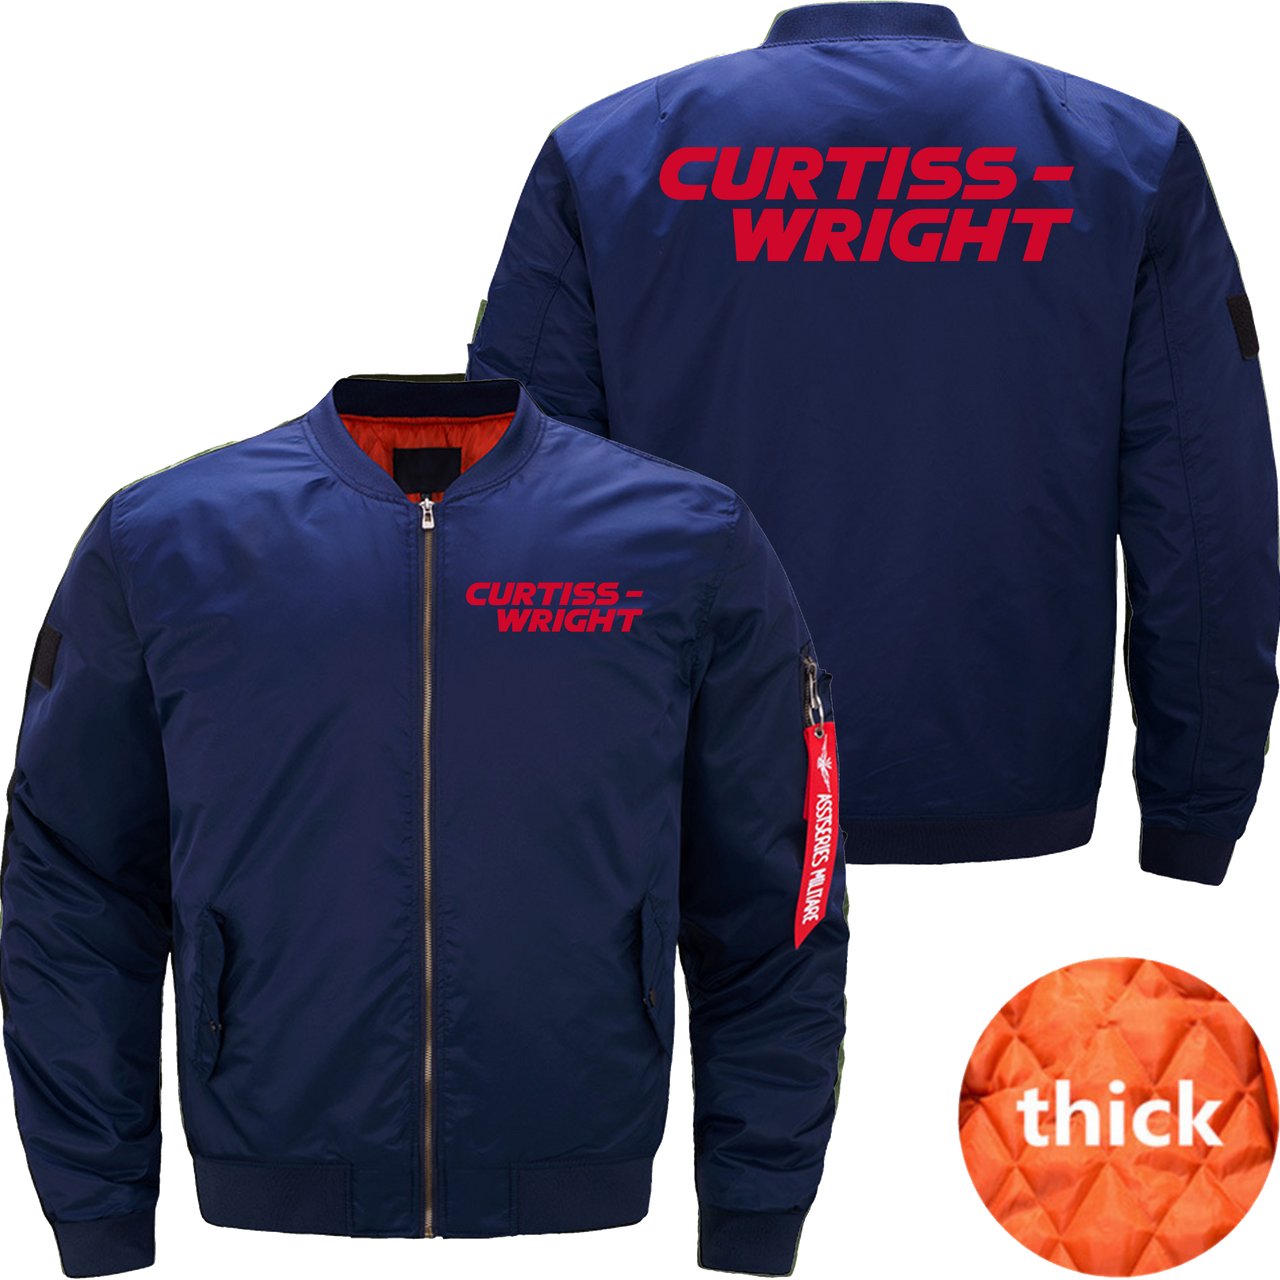 curtiss wright Jacket